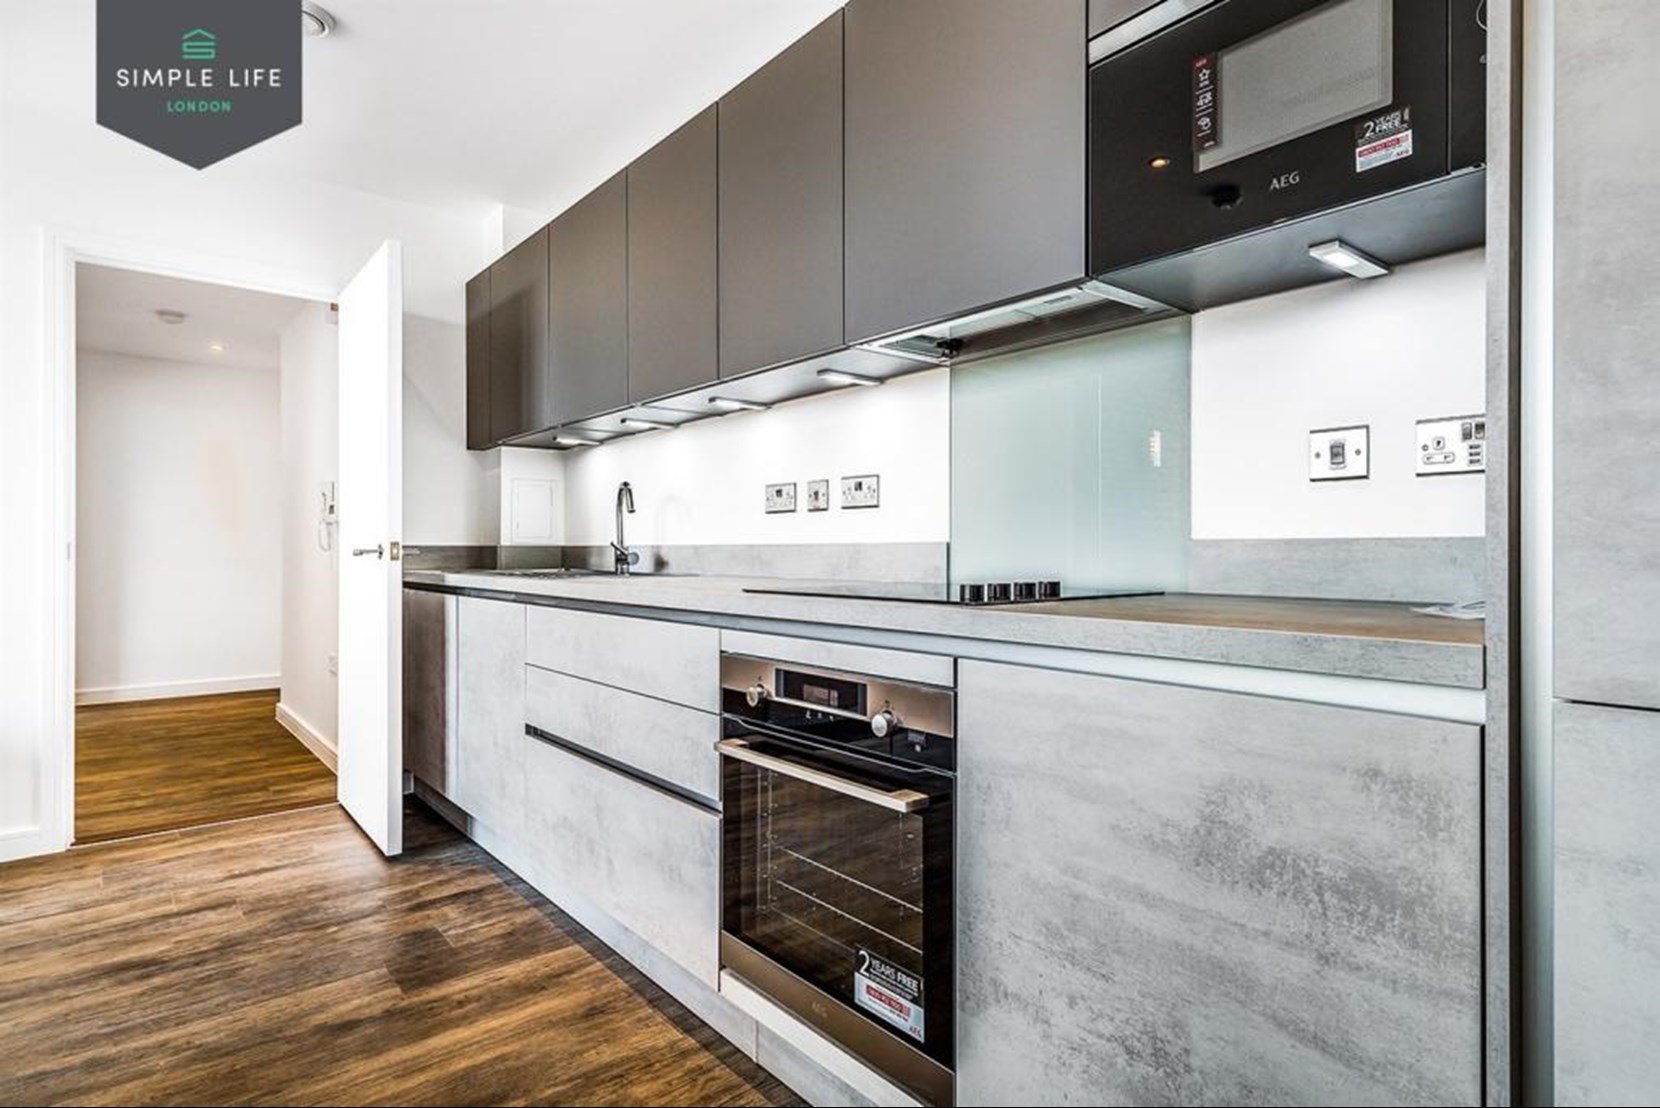 Apartments to Rent by Simple Life London in Beam Park, Havering, RM13, The Allegro kitchen